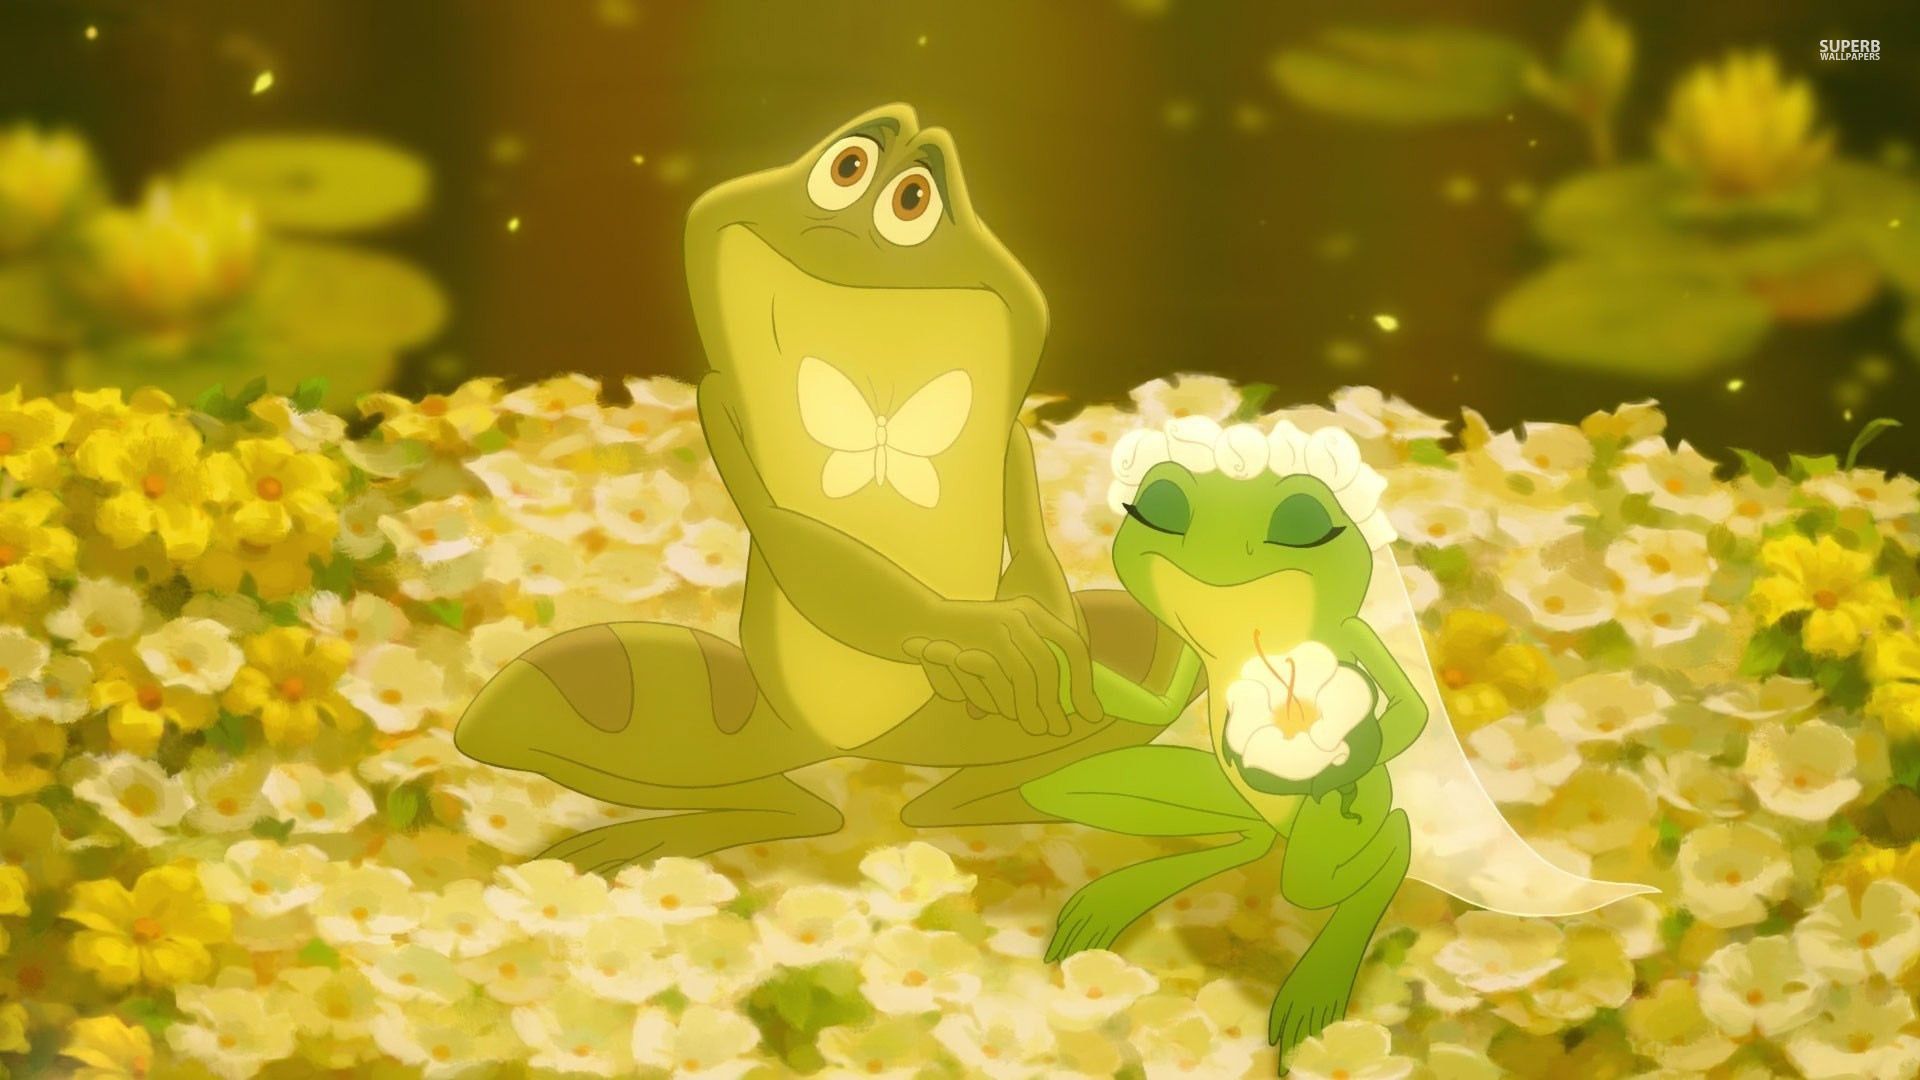 The Princess and the Frog wallpaper - Cartoon wallpapers - #33134